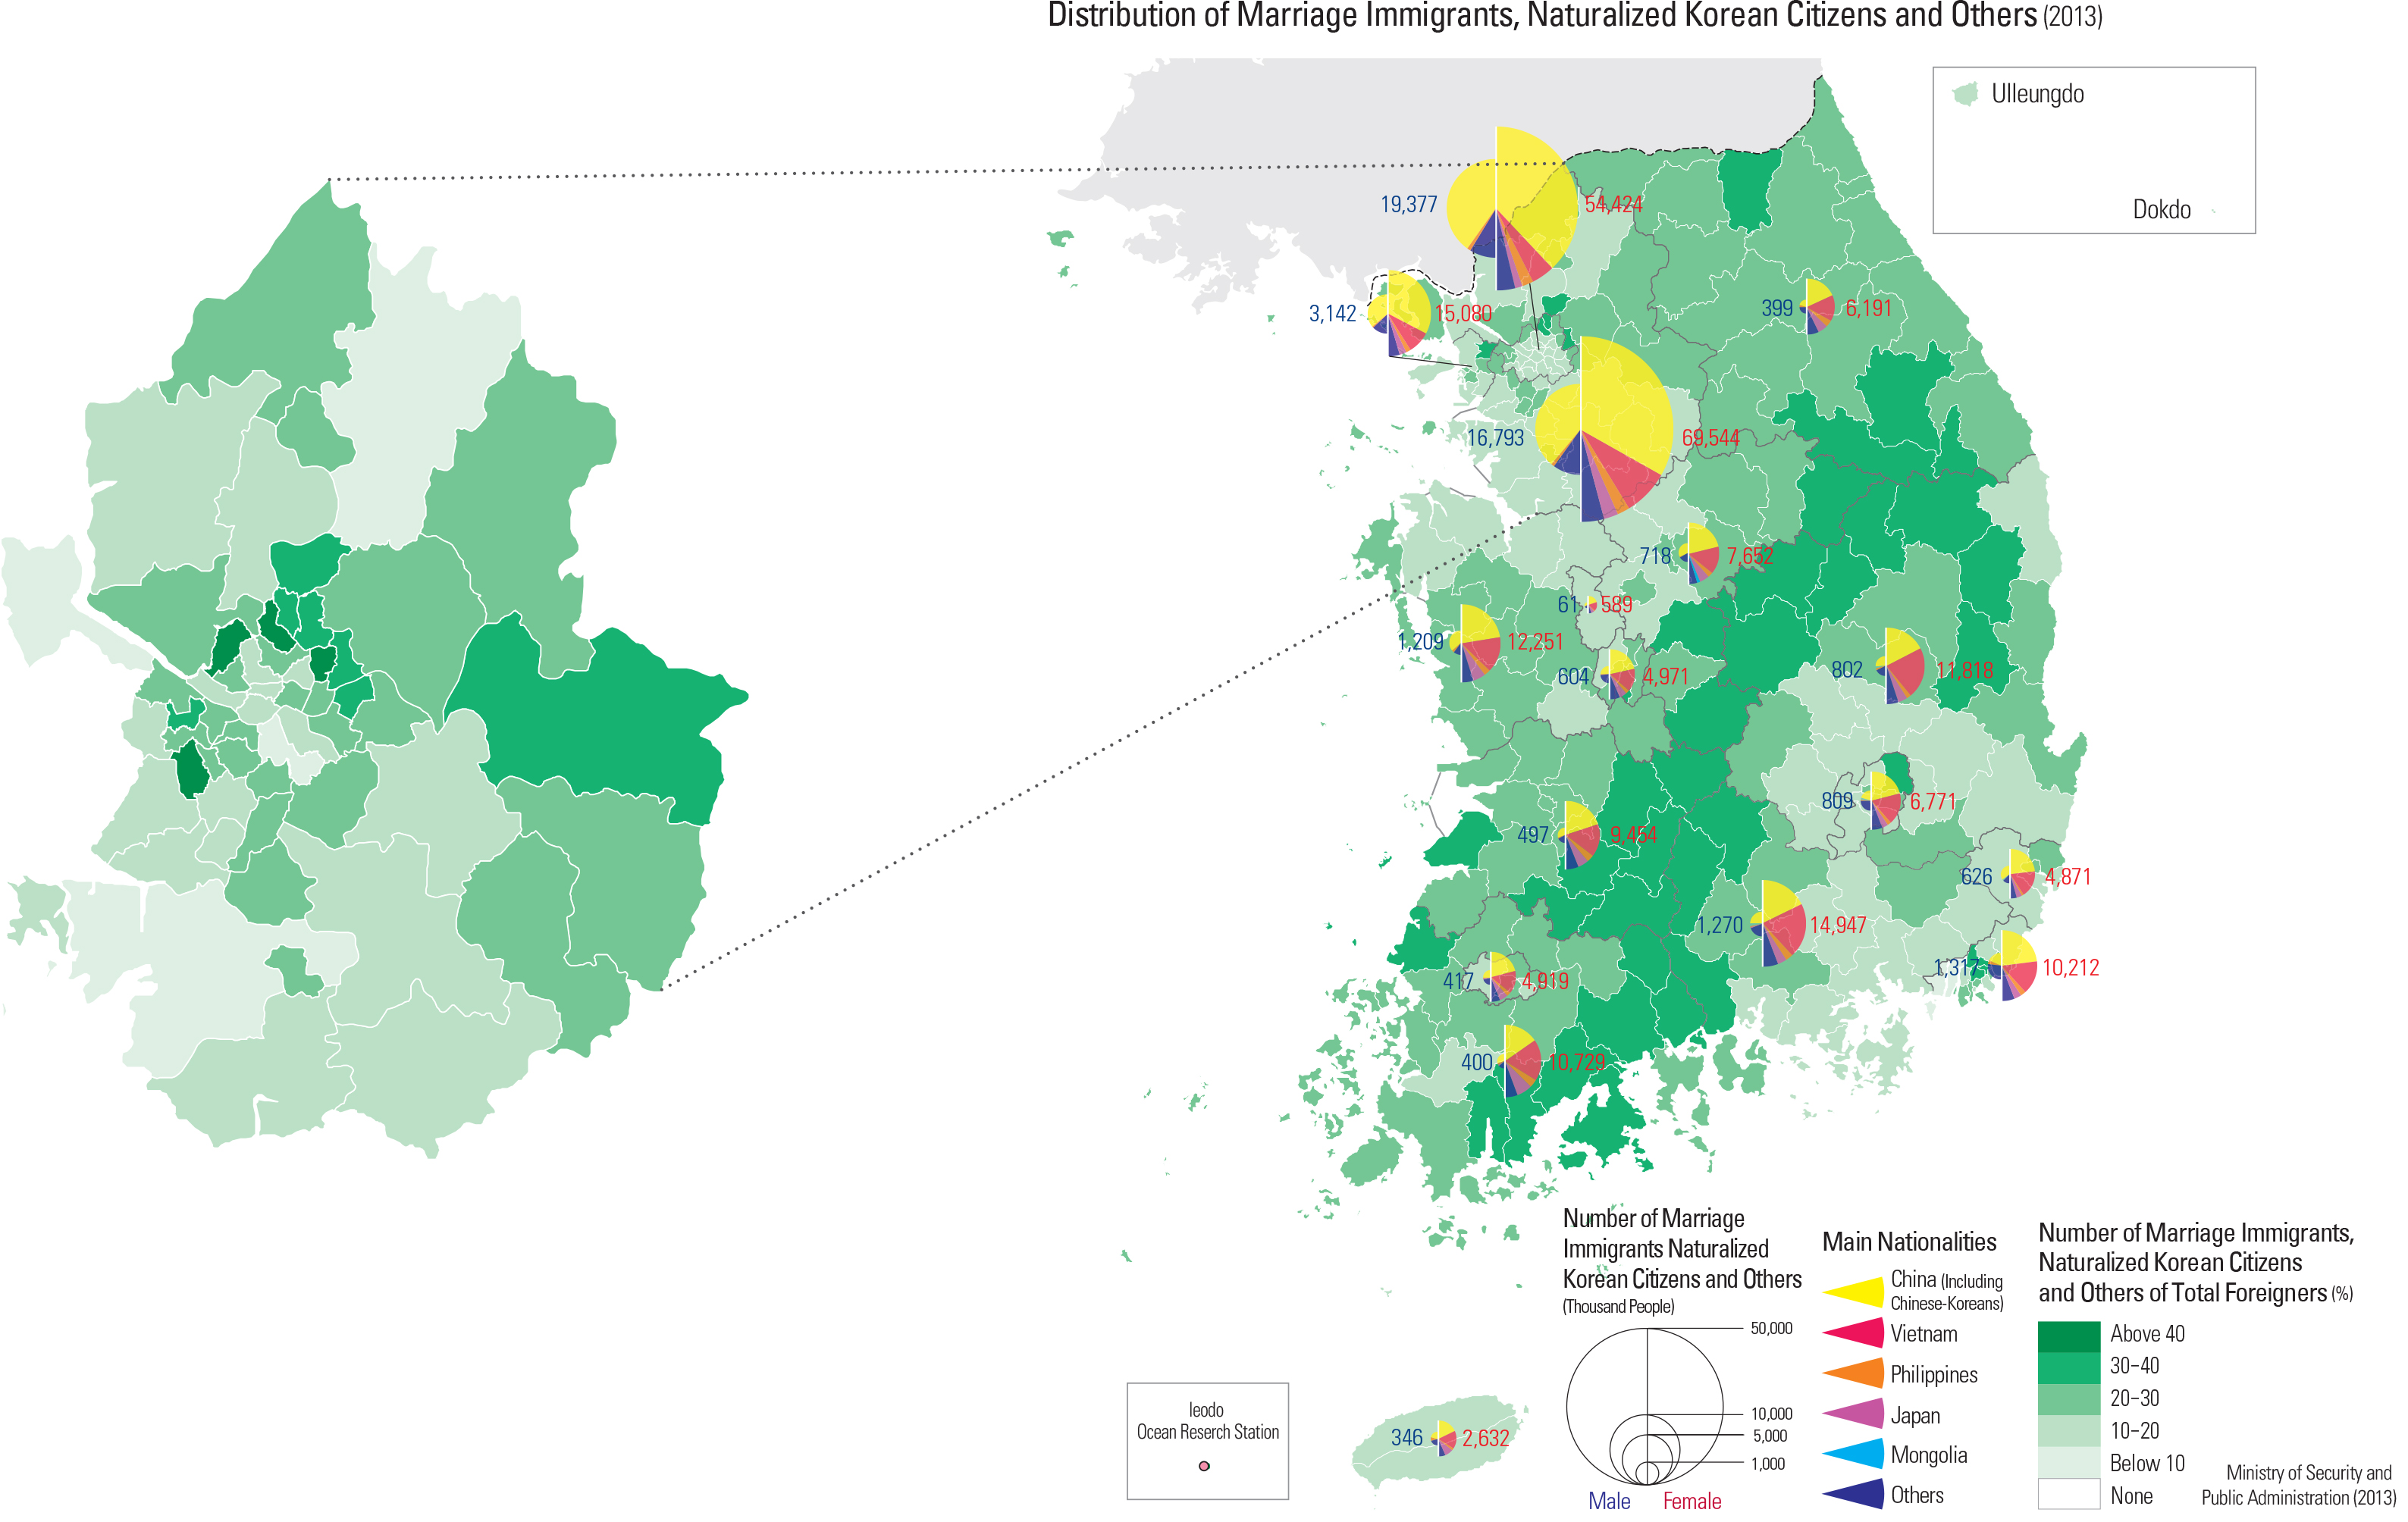 Distribution of Marriage Immigrants, Naturalized Korean Citizens and Others (2013)